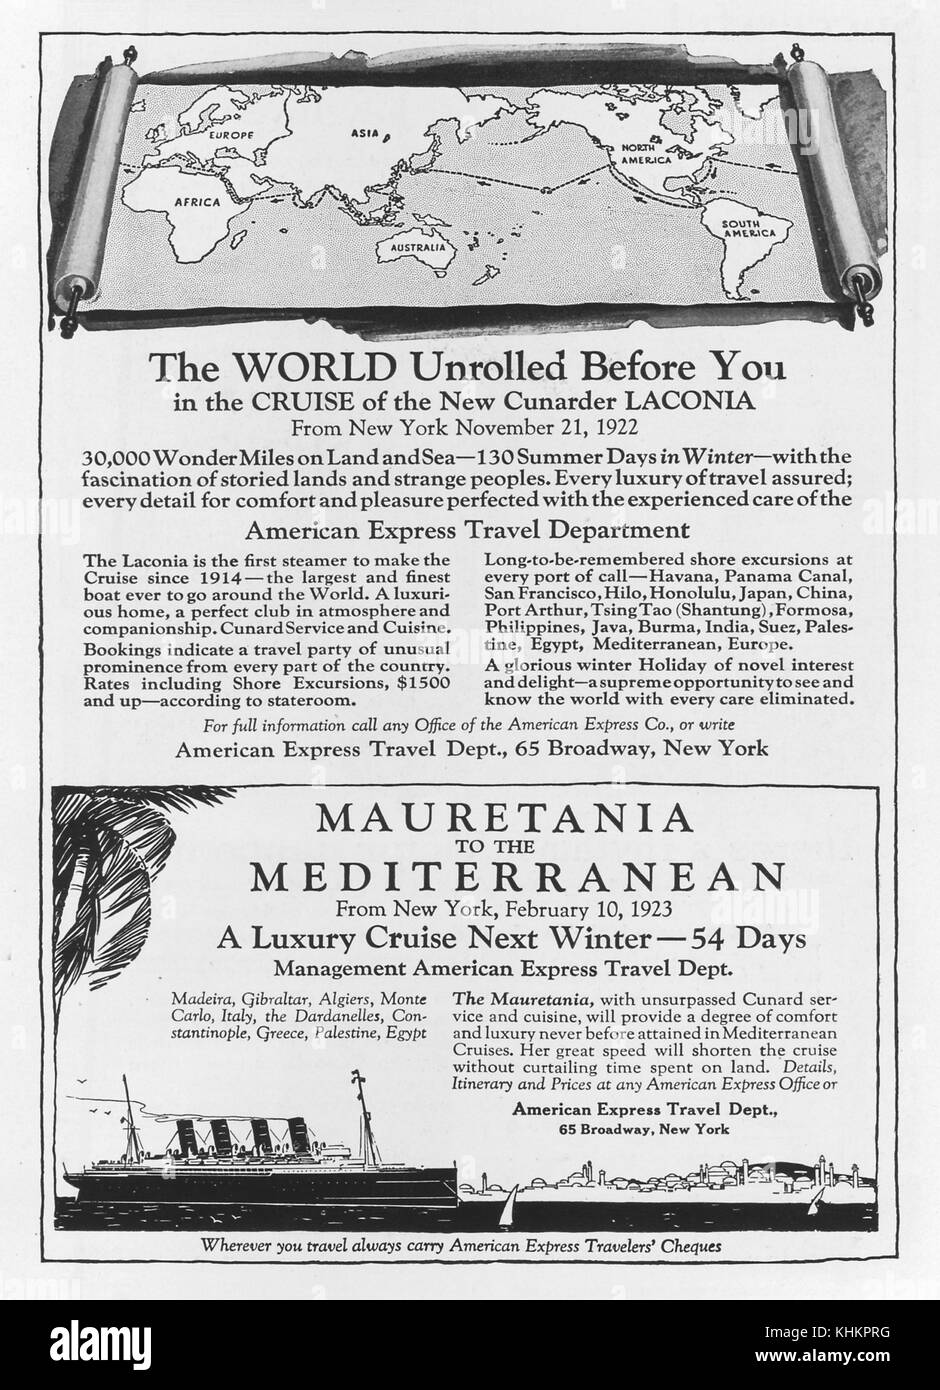 Advertisement for American Express Travel agency, including image of the Mauretania steam ship, 1922. Stock Photo